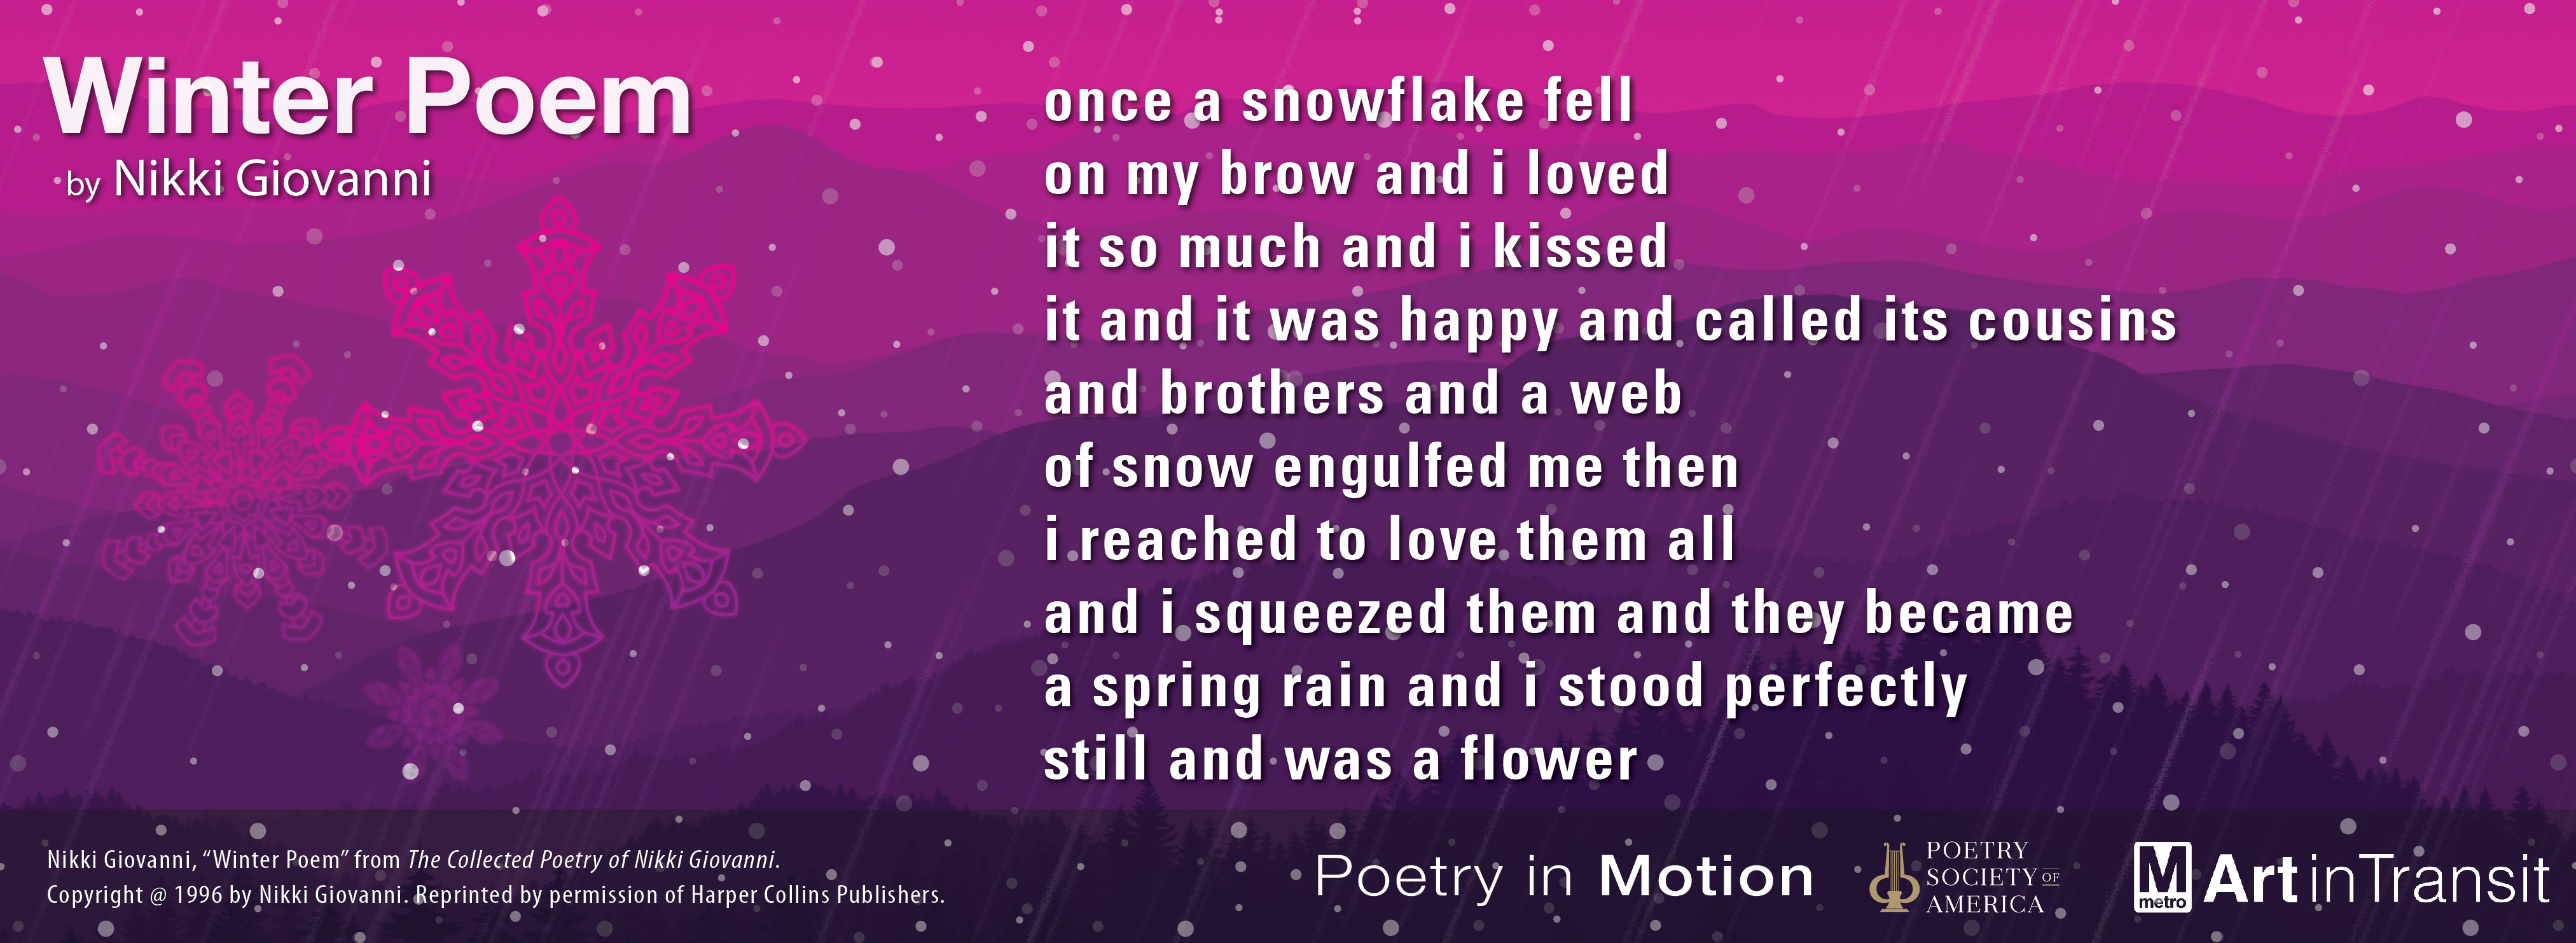 A vertical poster in shades of magenta features the poem Winter Poem, by Nikki Giovanni. Mountains slope in the background and white snowflakes fall.